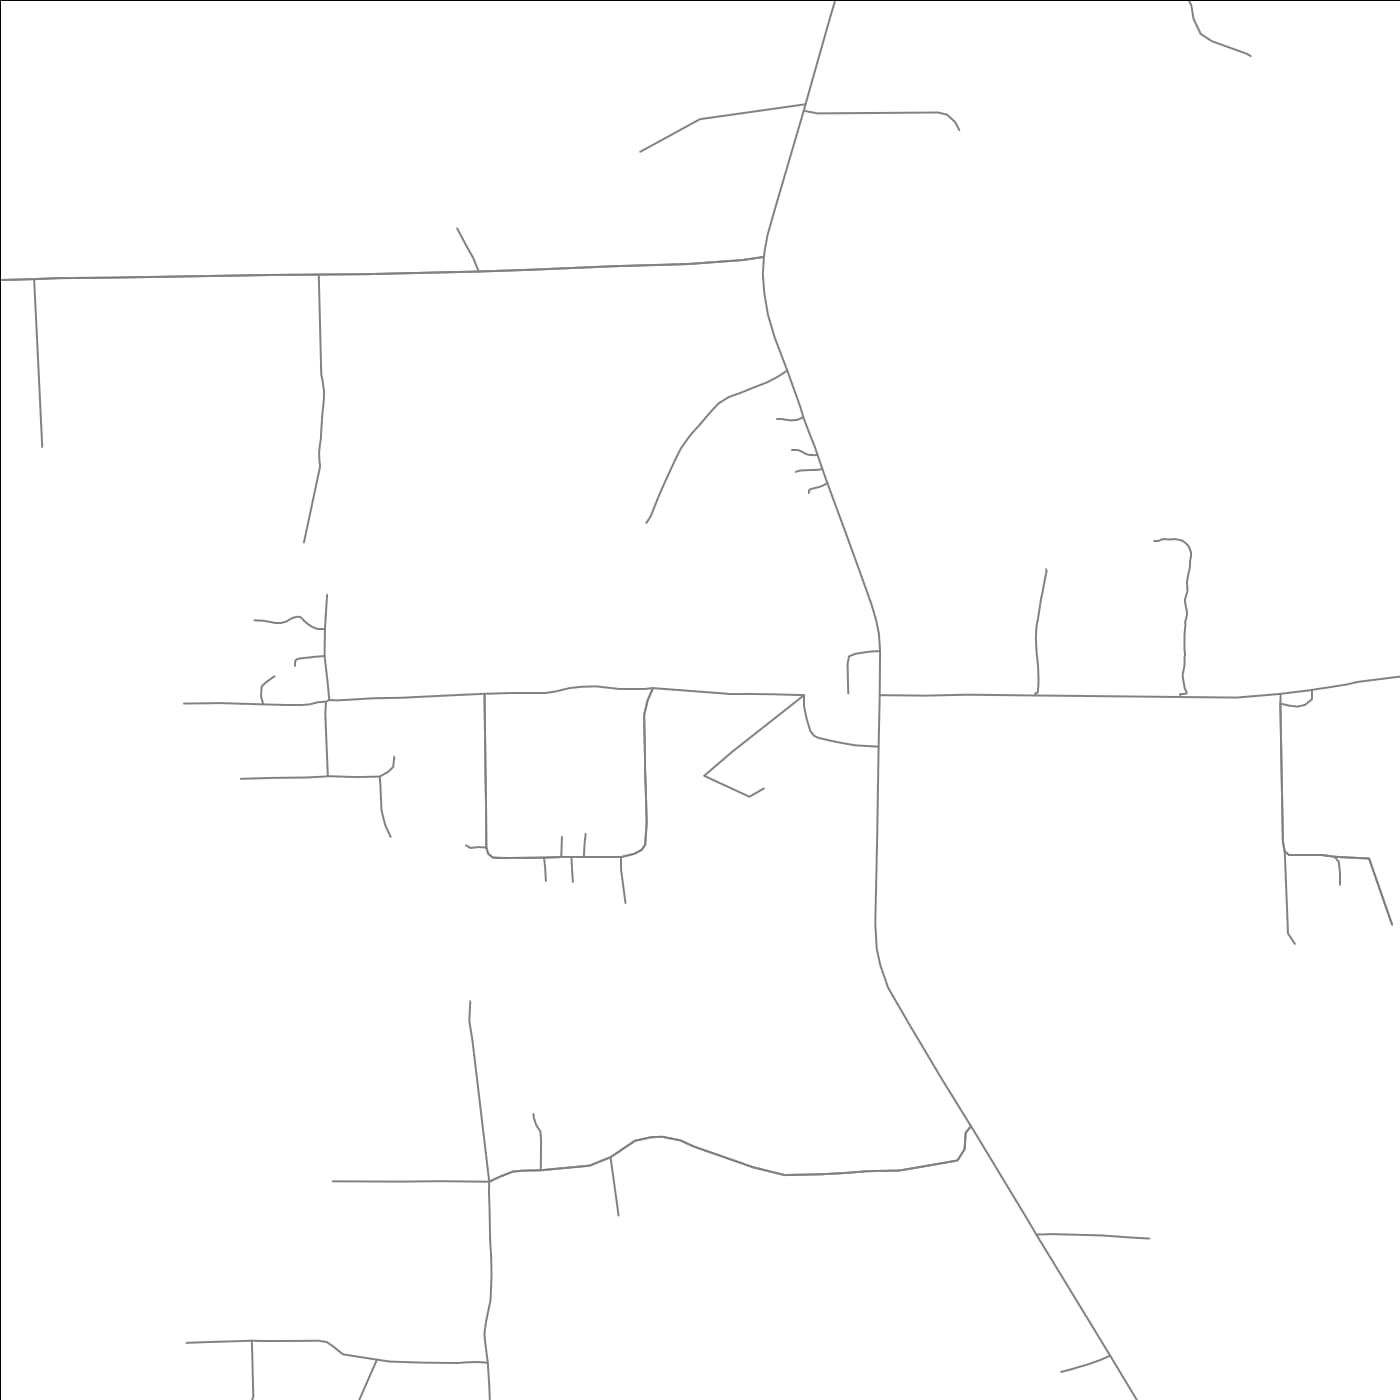 ROAD MAP OF WOODLAWN, ARKANSAS BY MAPBAKES